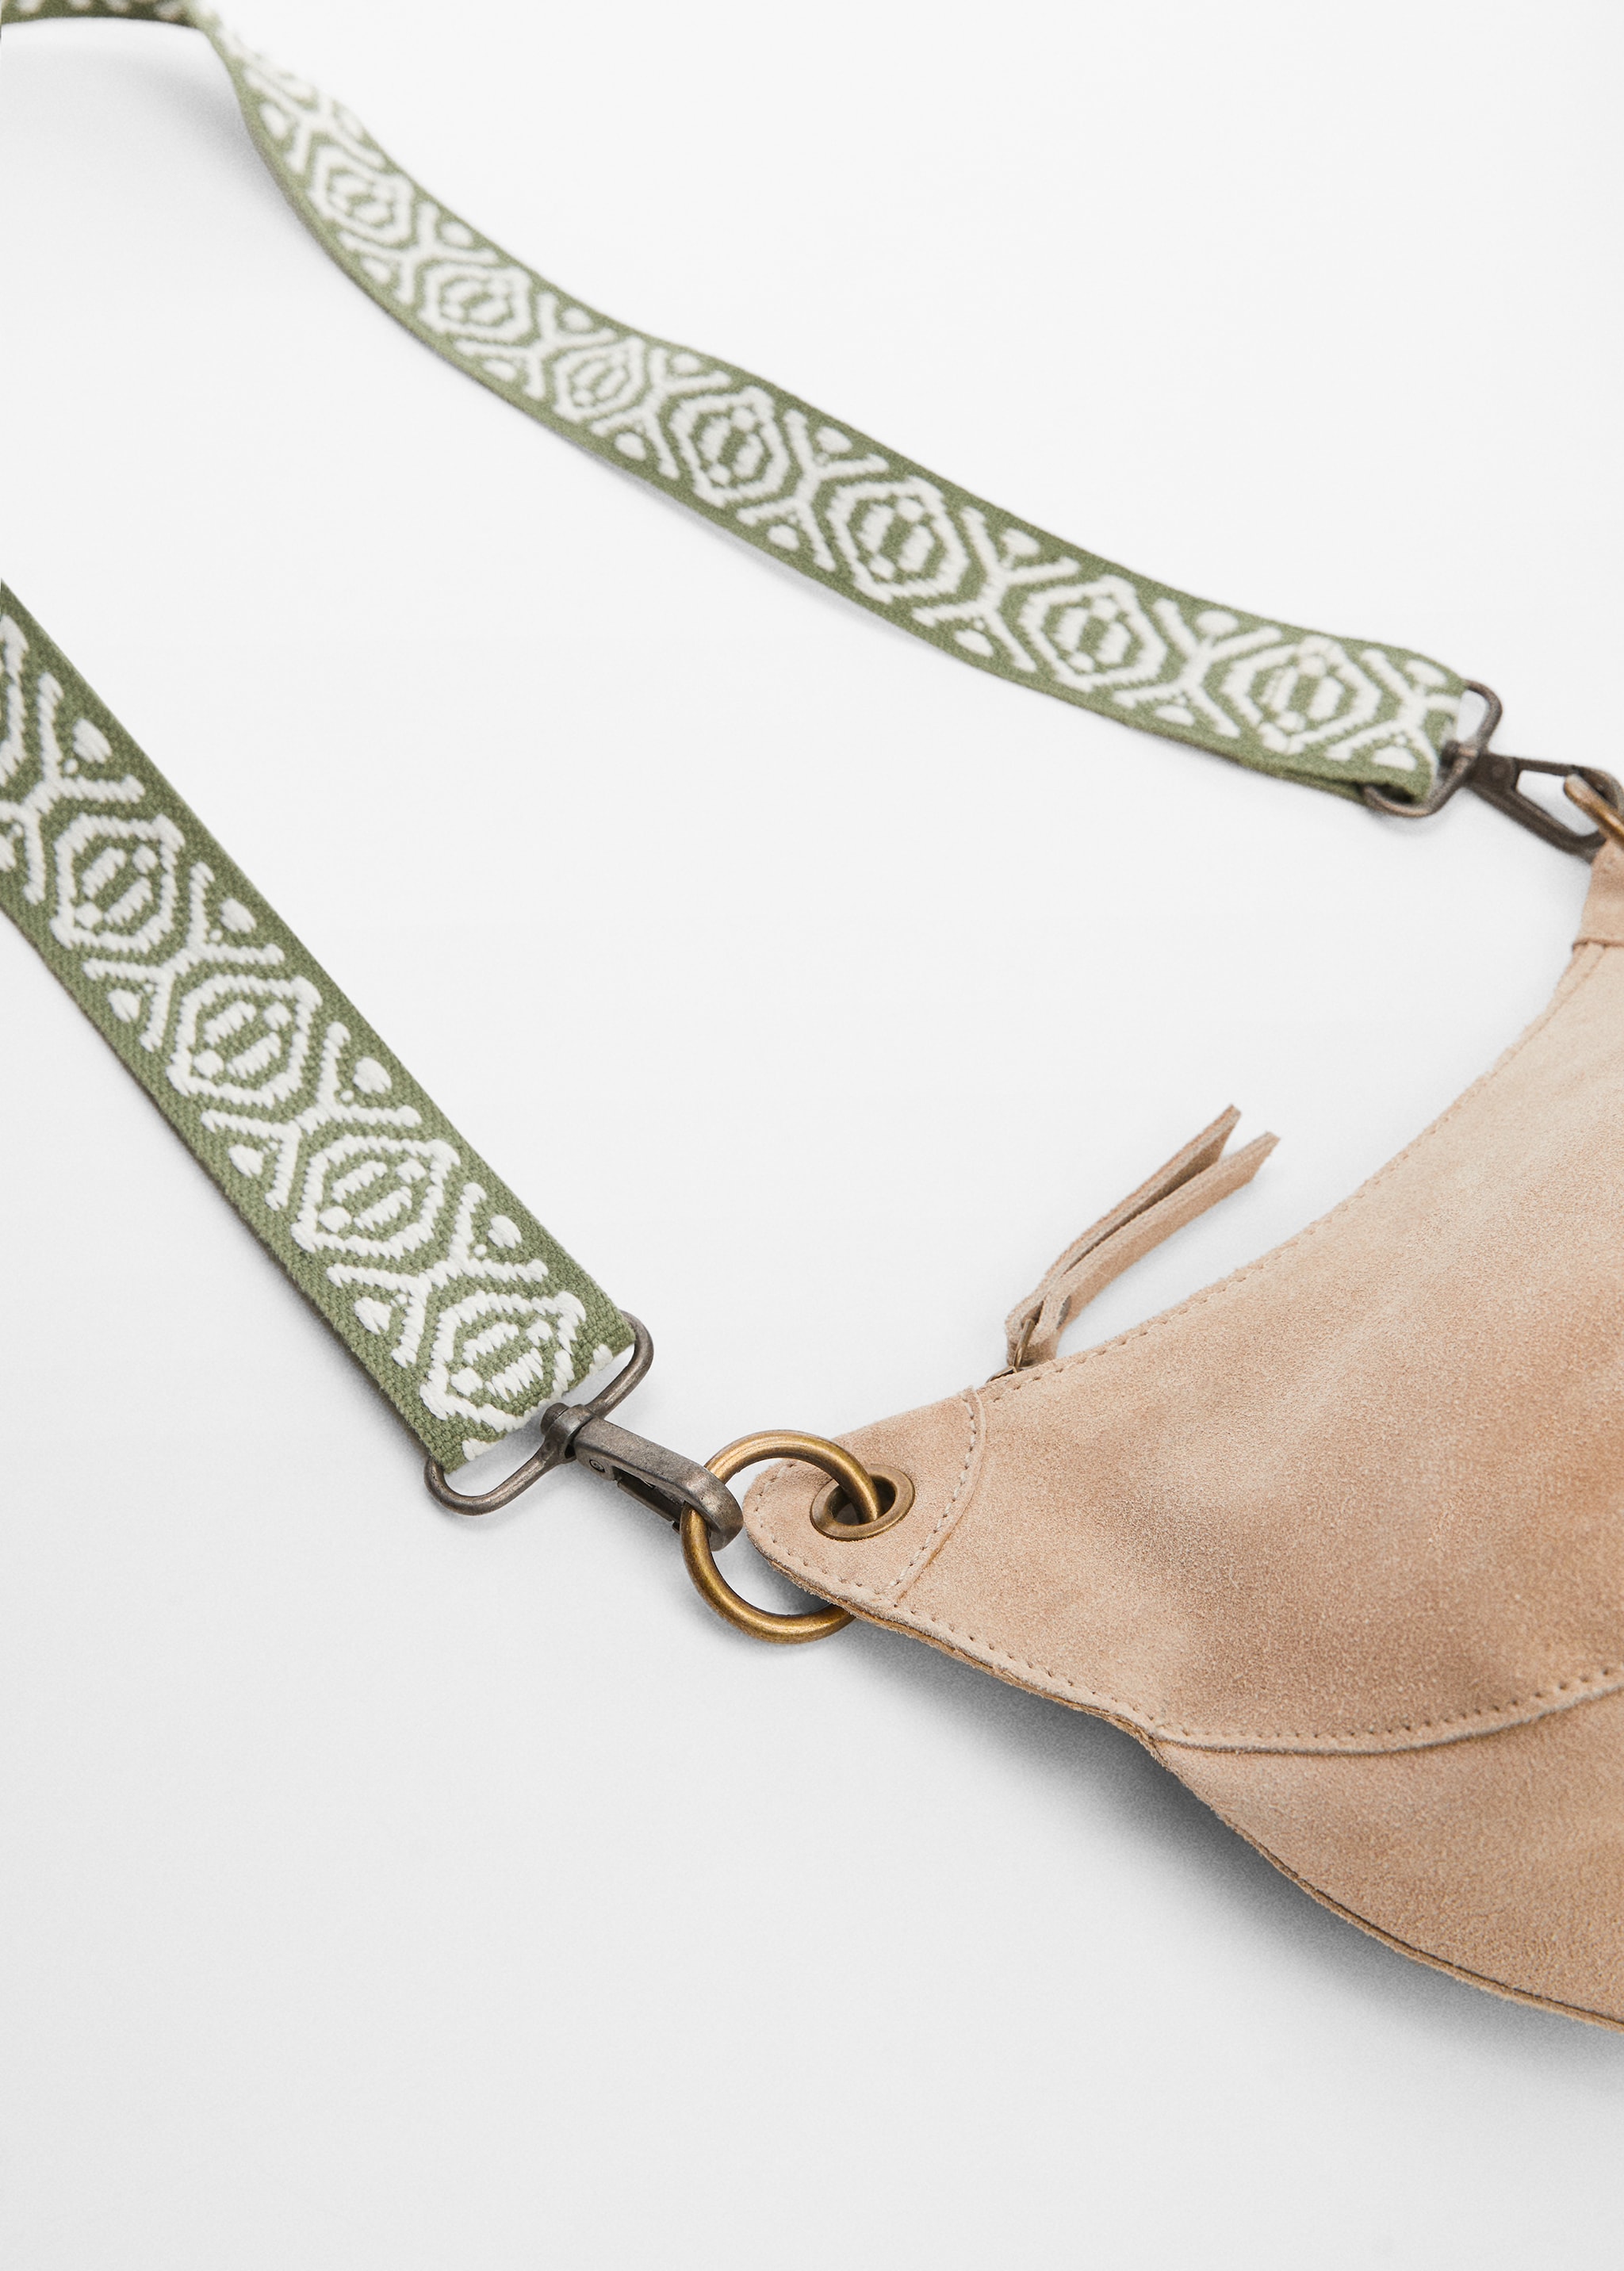 Patterned bag strap - Details of the article 1